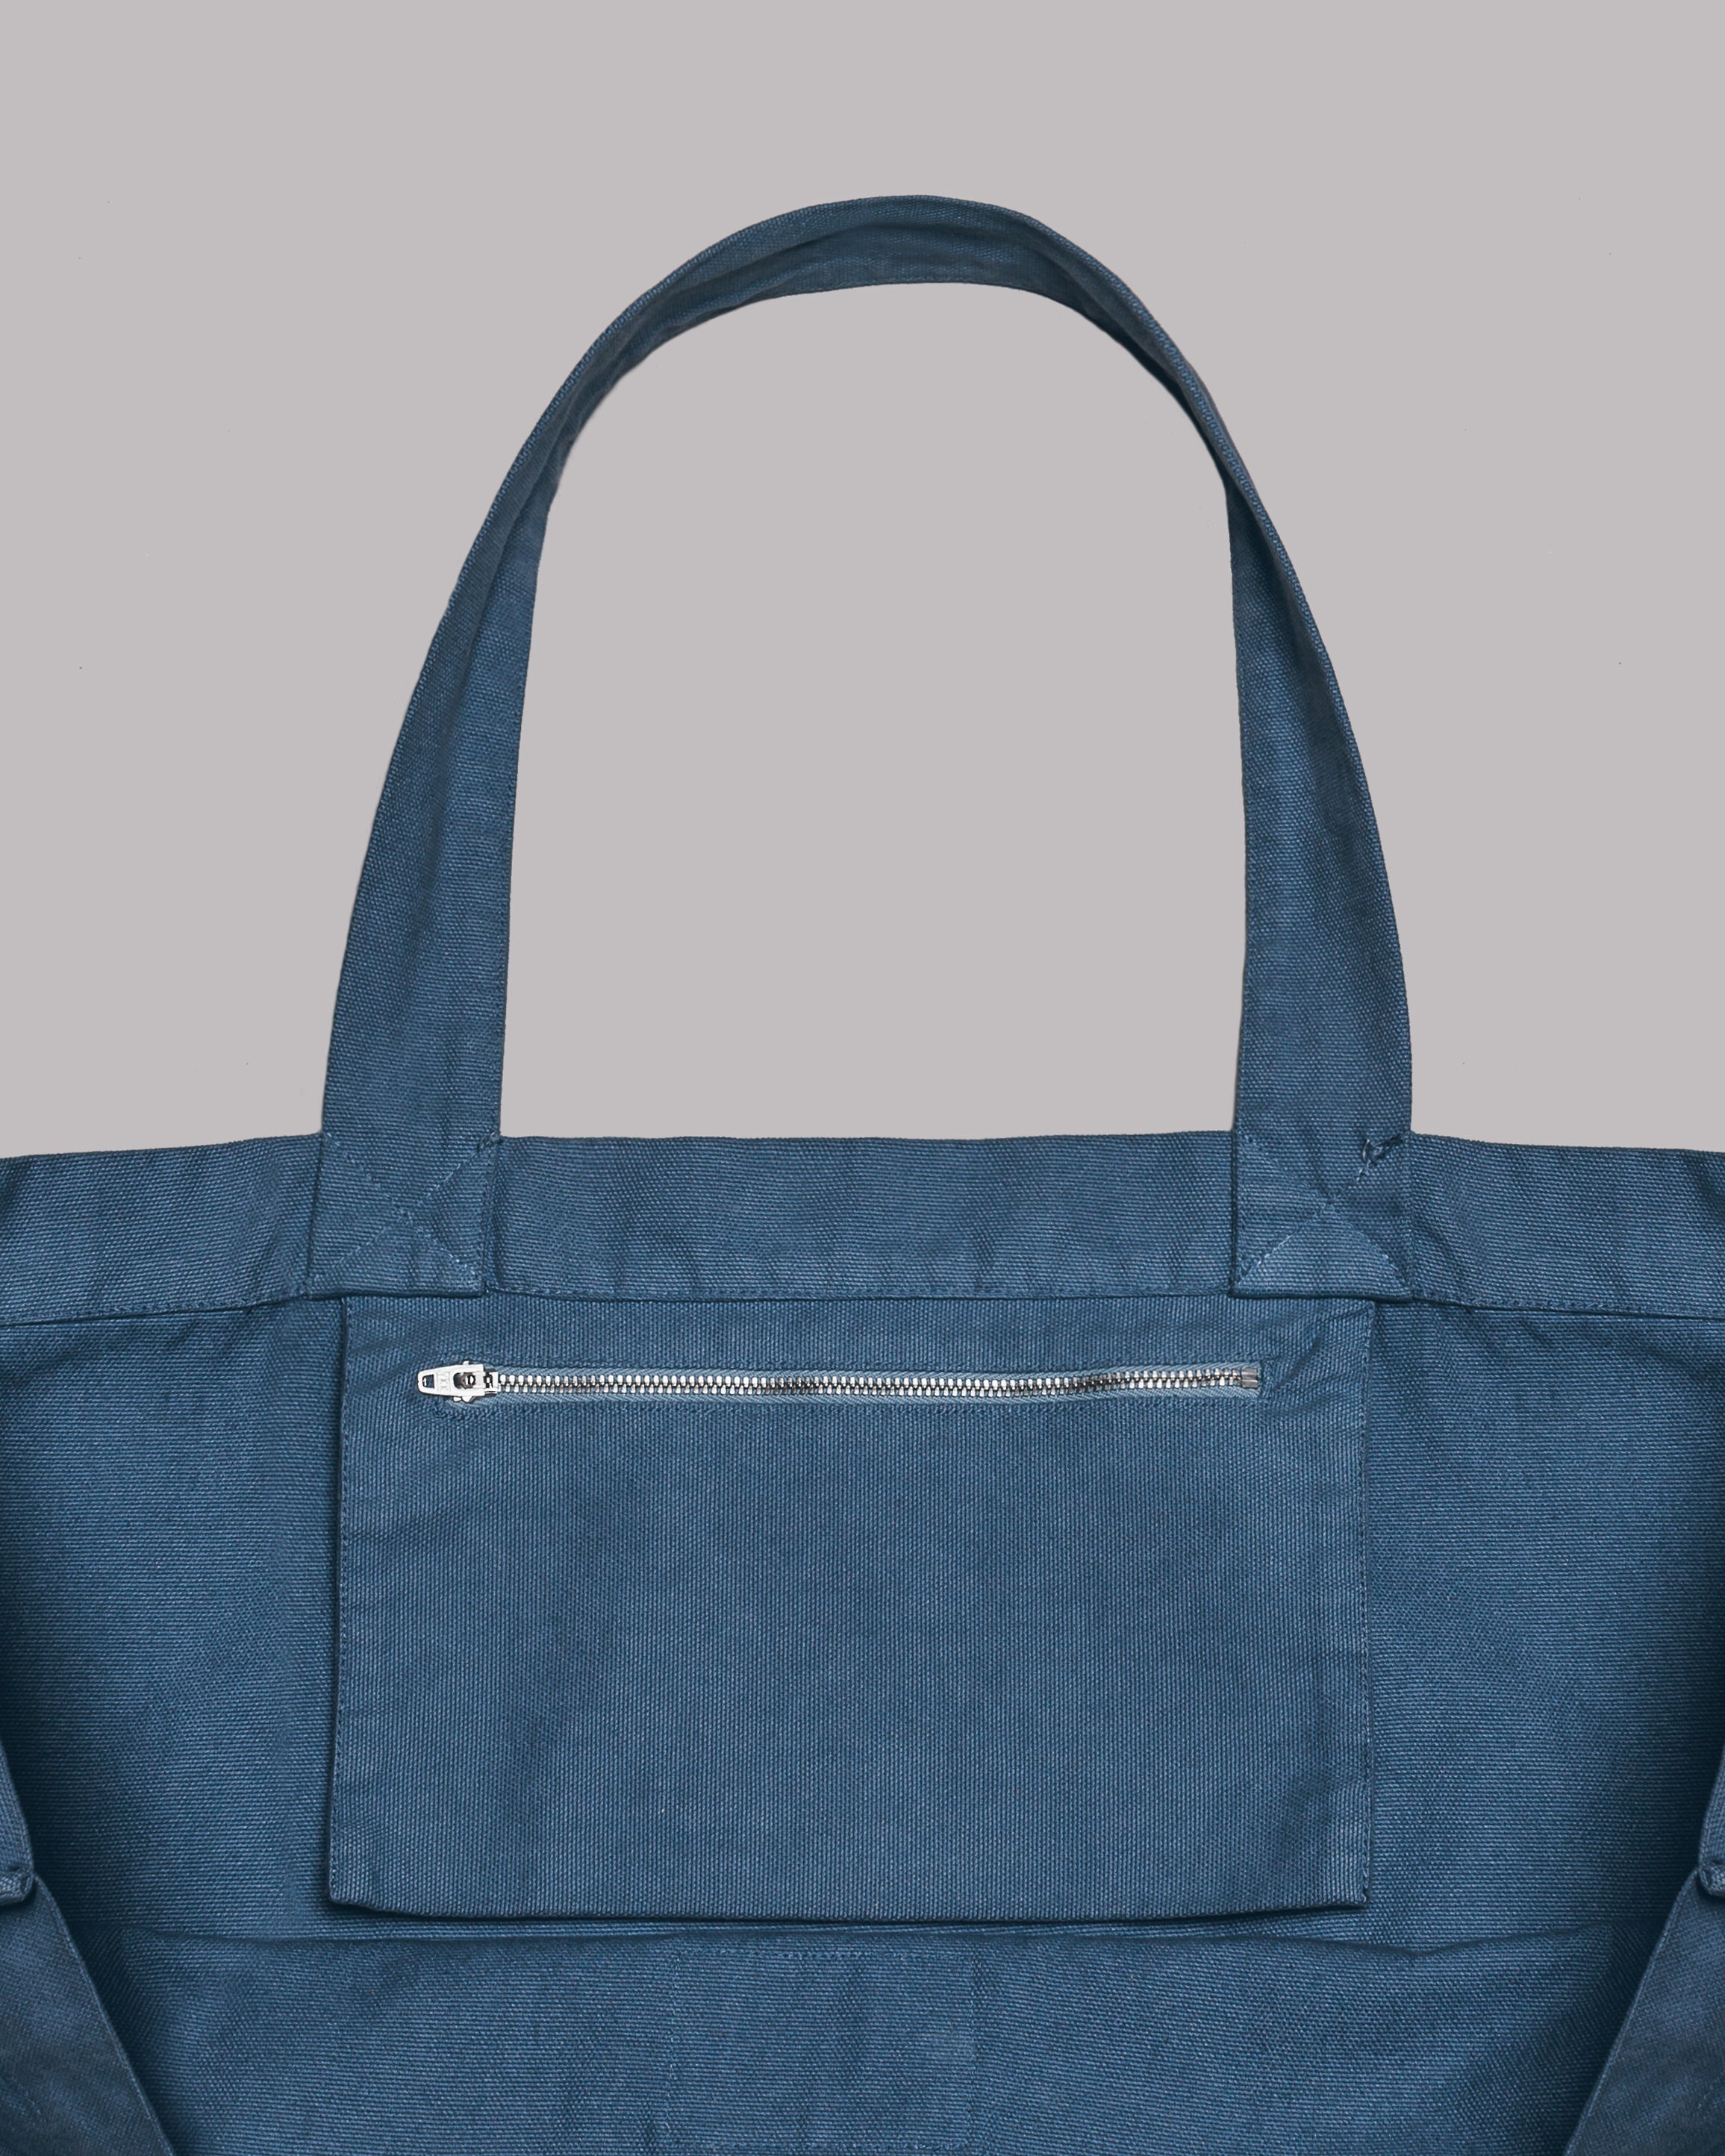 The Blue Small Canvas Bag